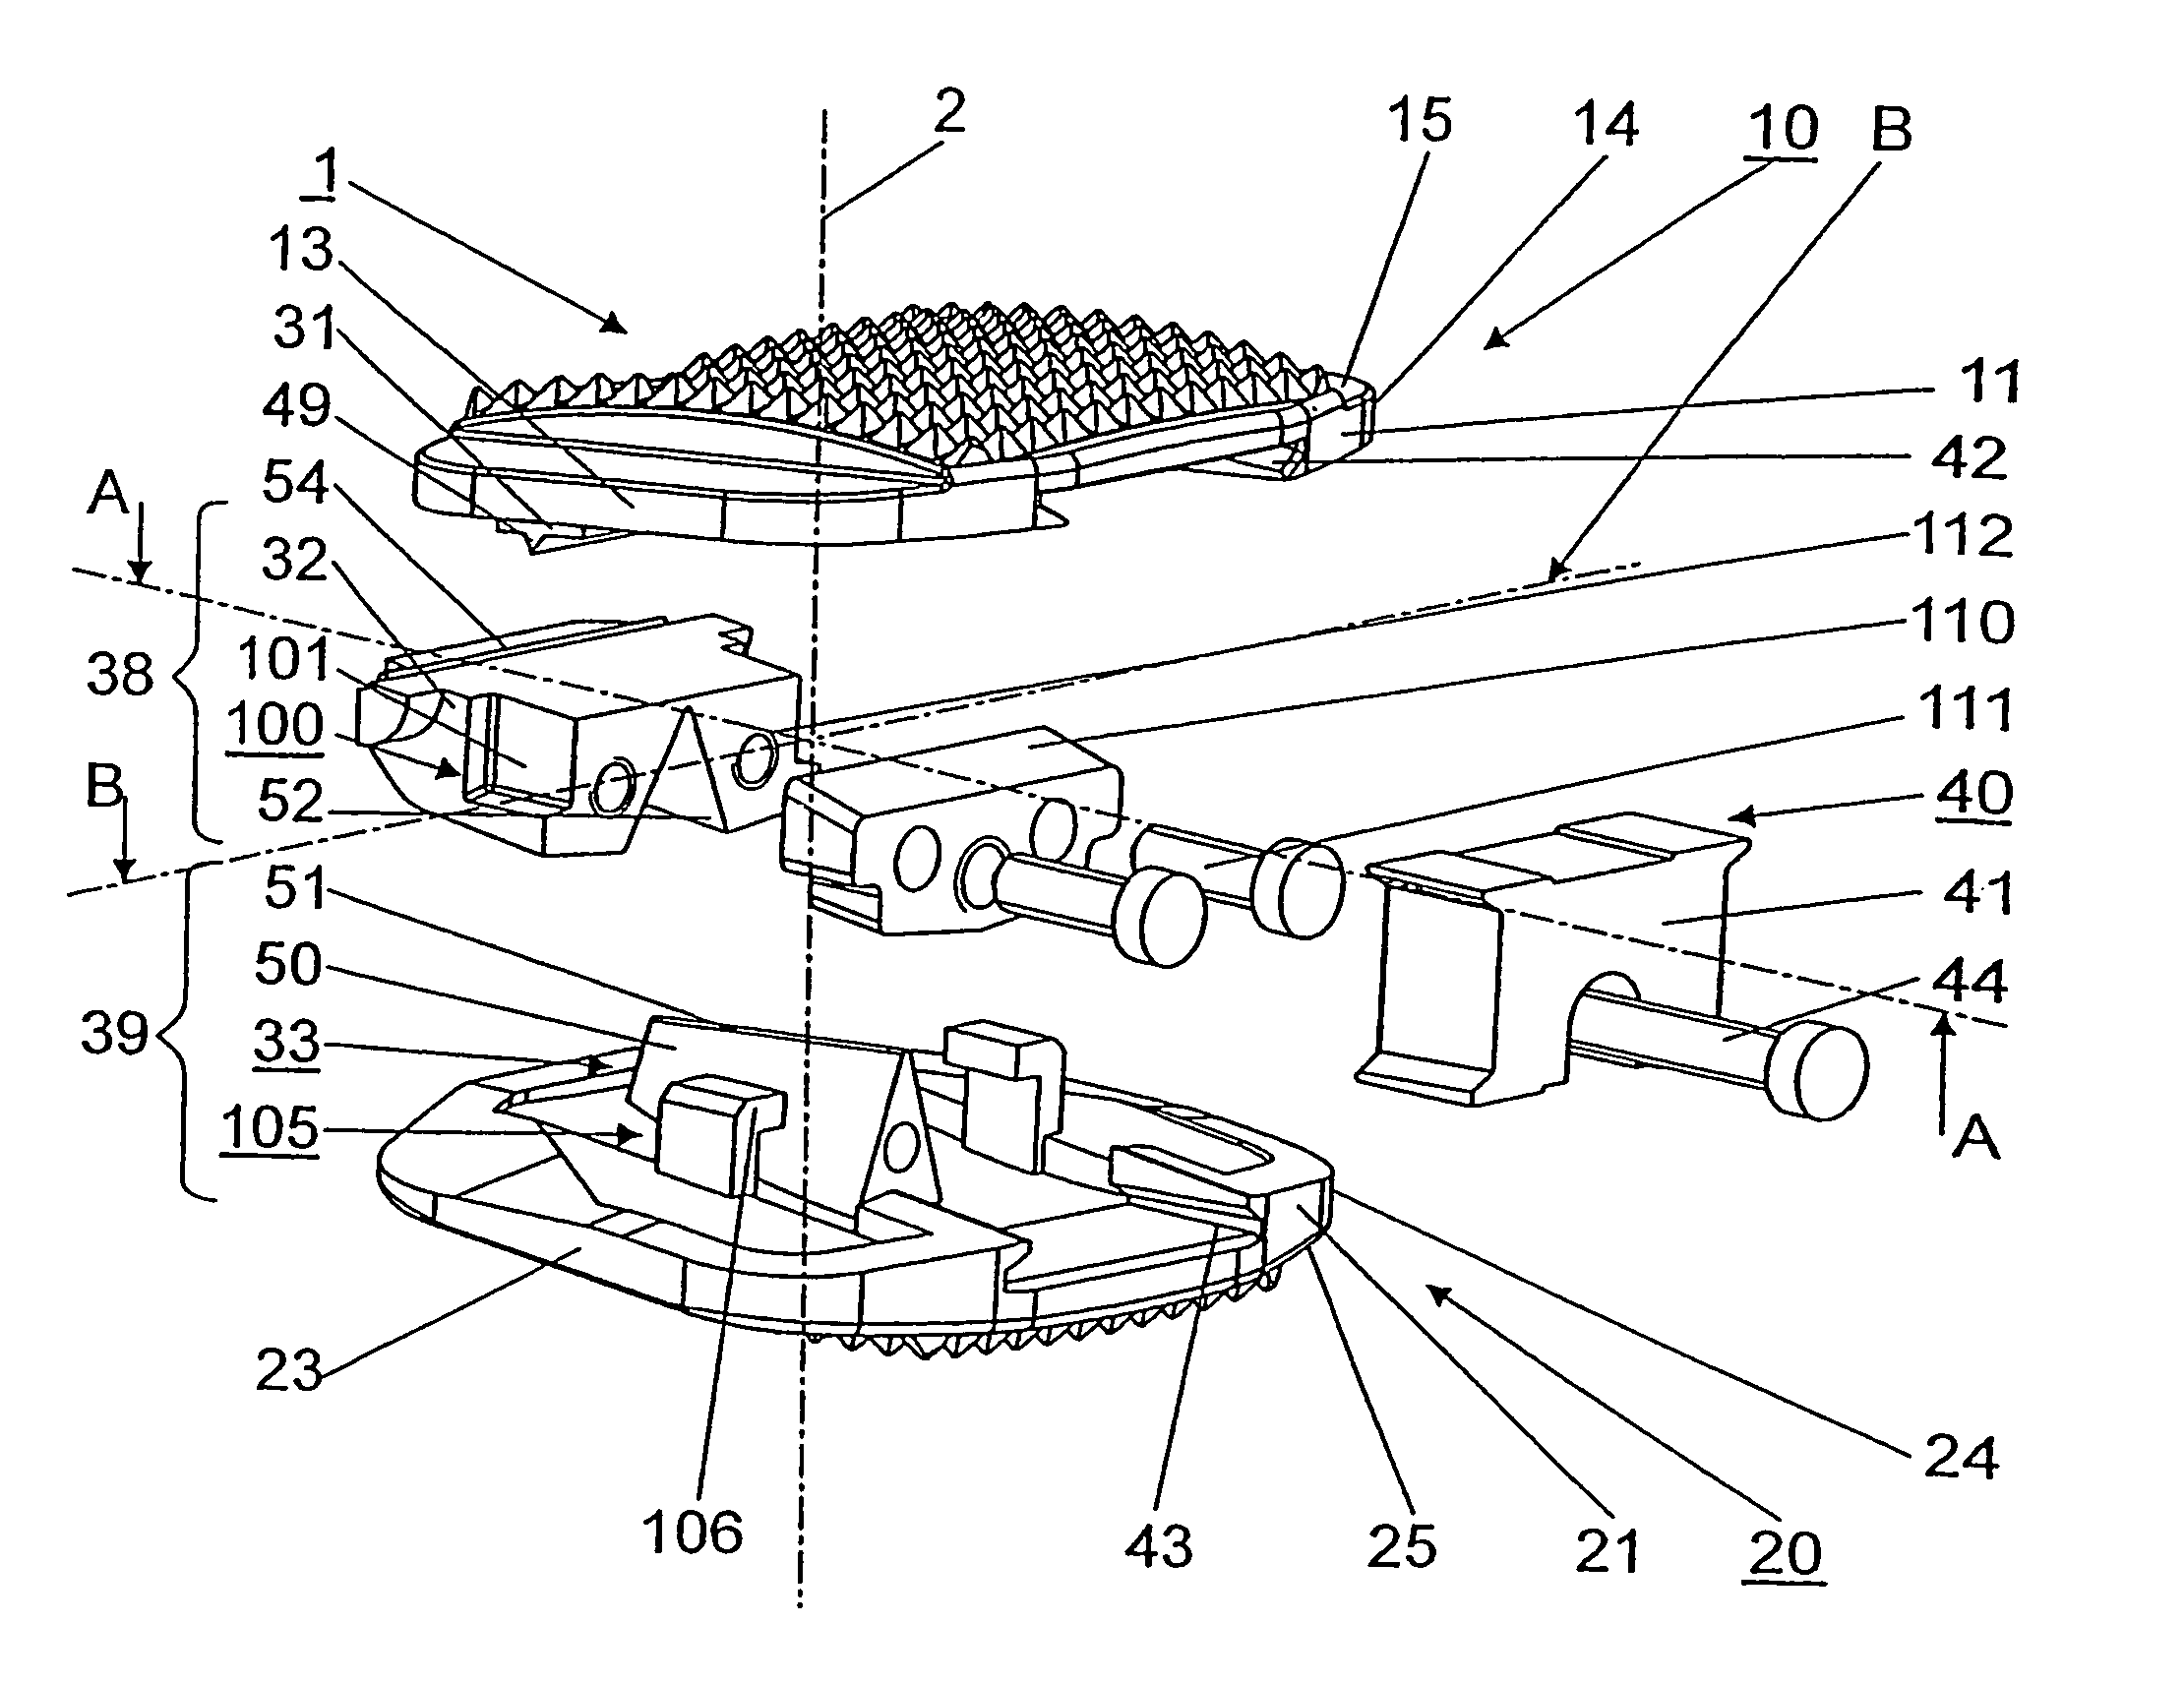 Intervertebral implant with tiltable joint parts